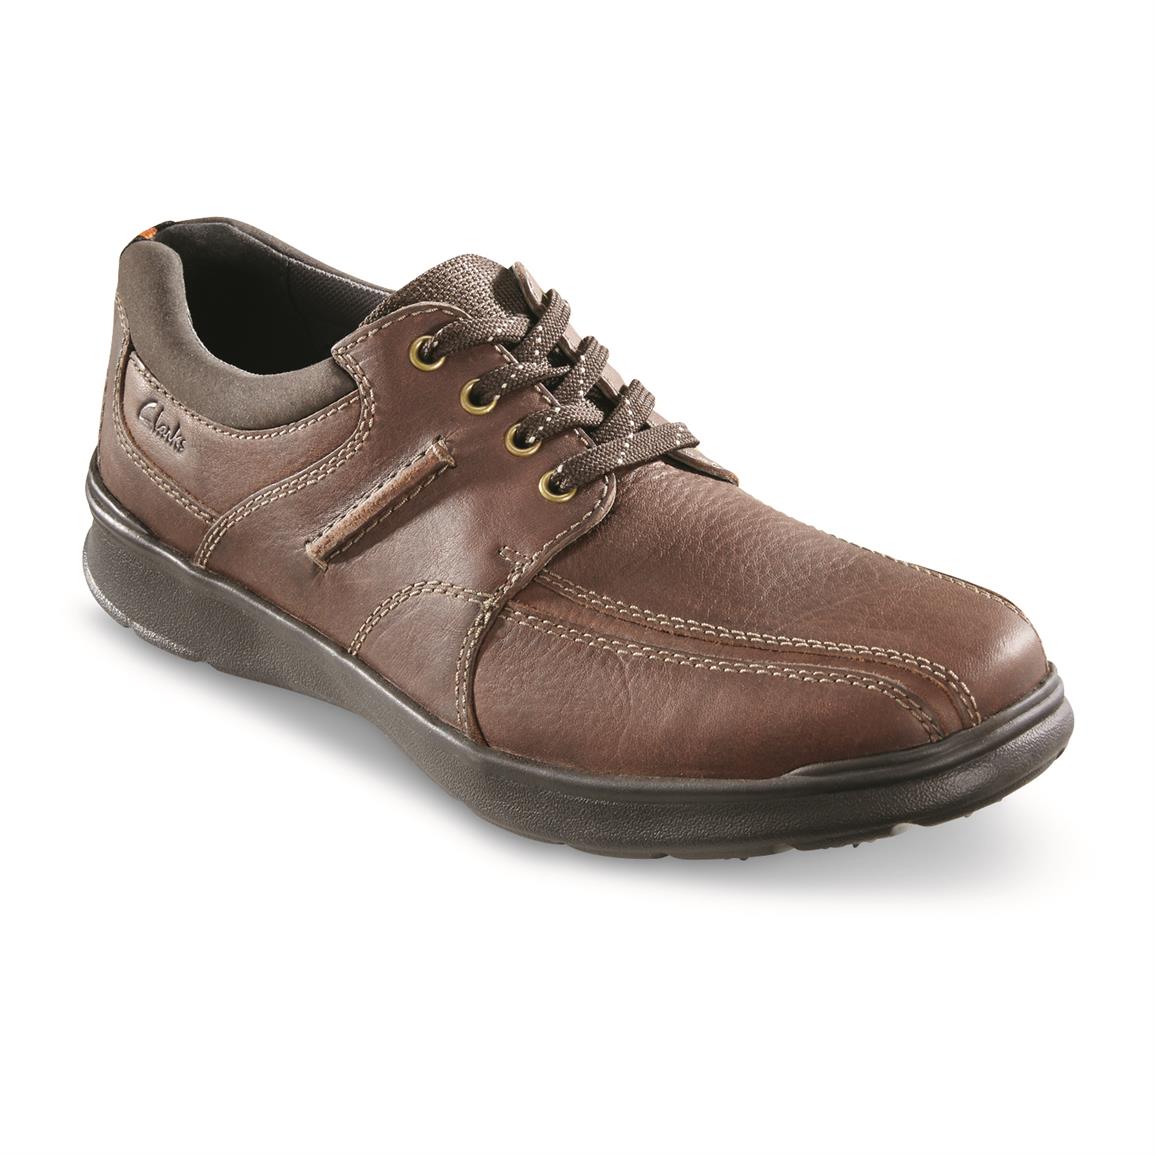 Clarks Men's Cottrell Edge Walking Shoes - 680850, Casual Shoes at ...